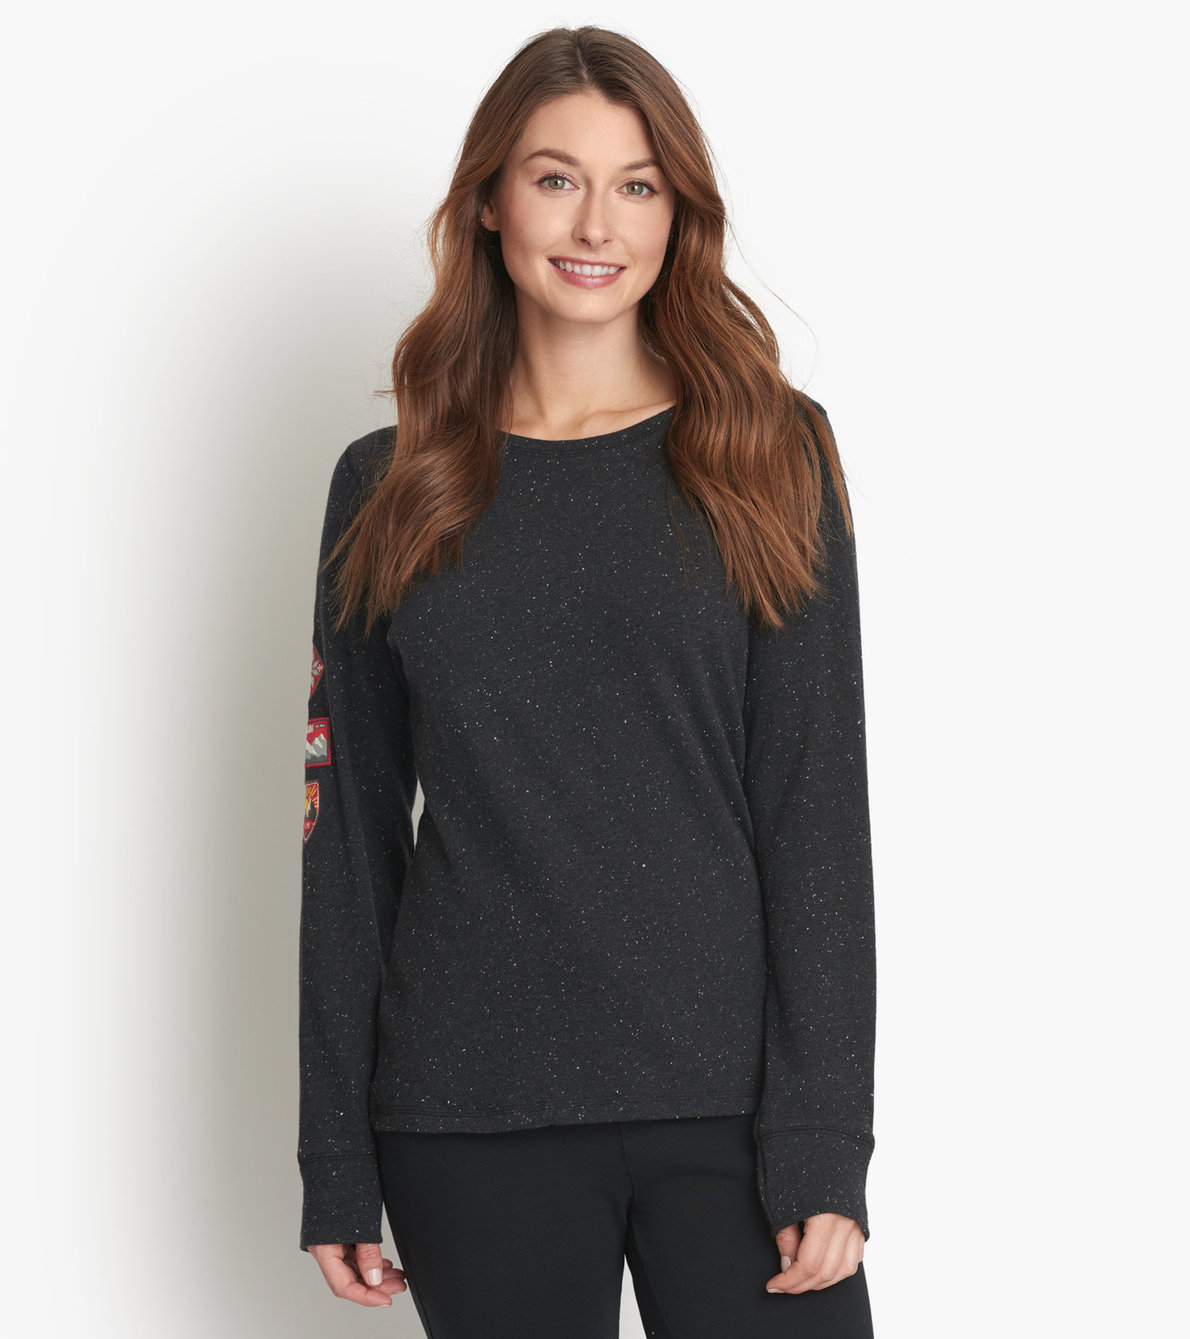 View larger image of Women's Heritage Long Sleeve Tee in Black 